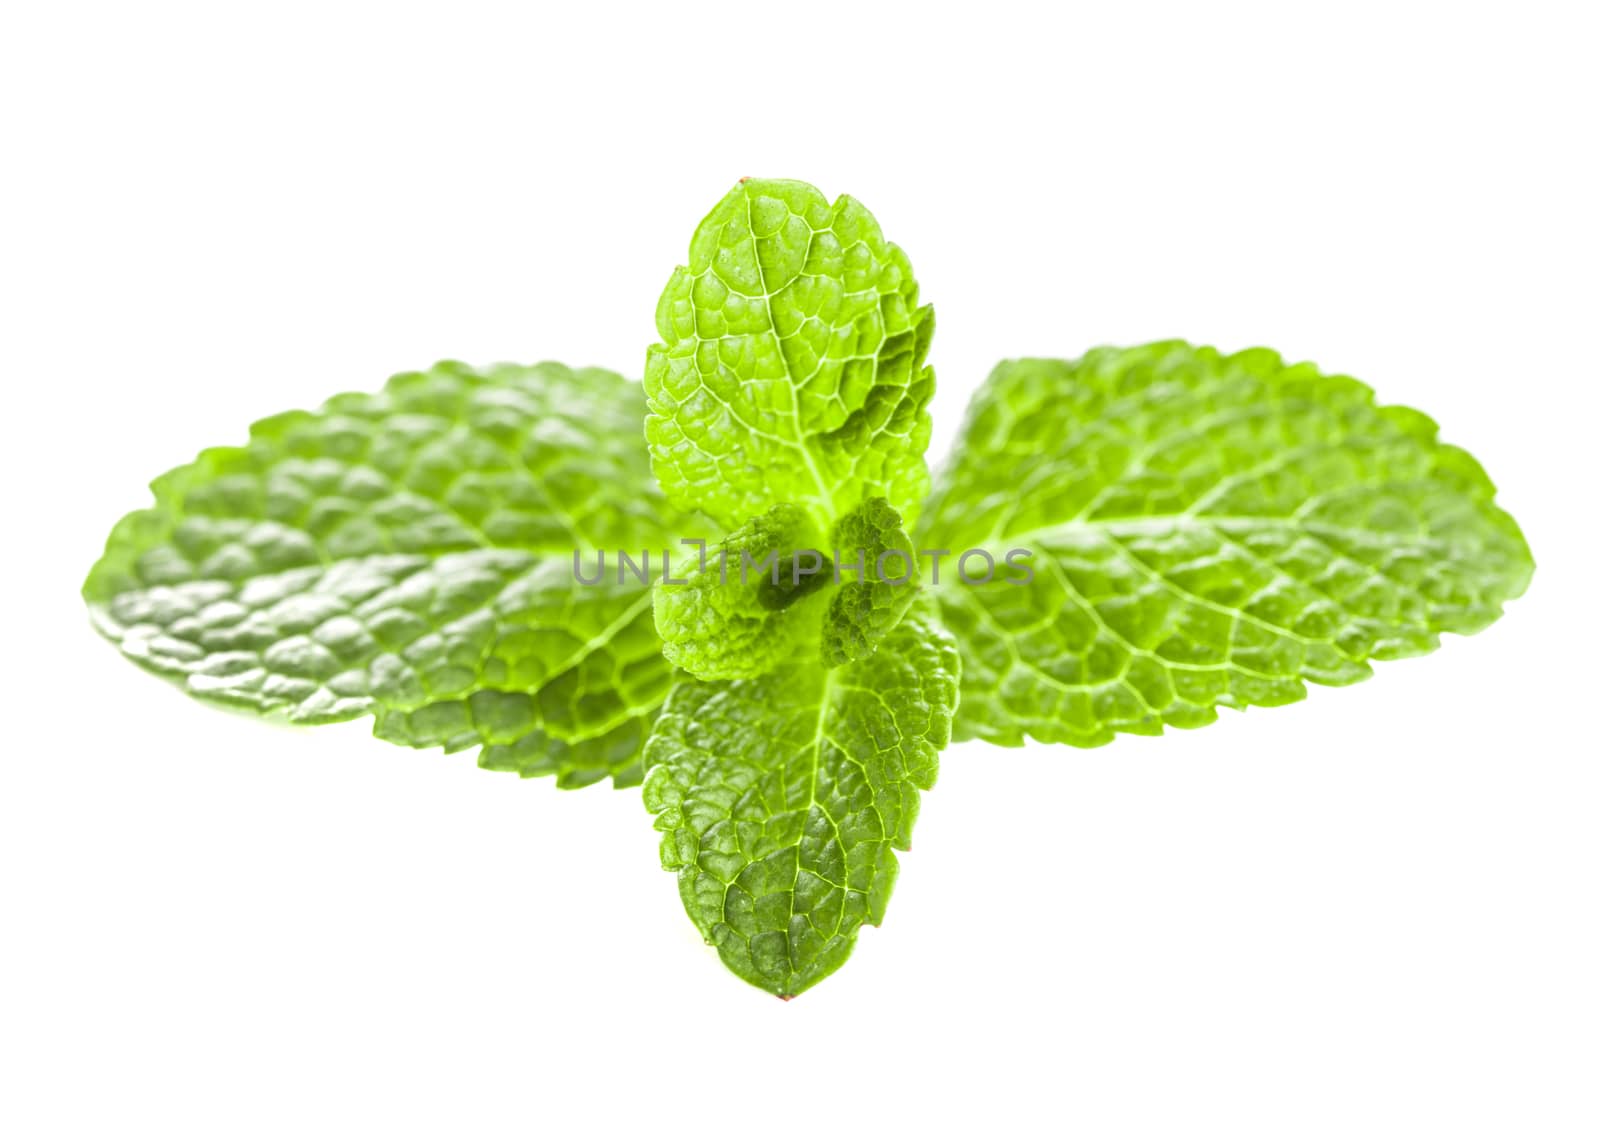 Mint leaves close up isolated on white